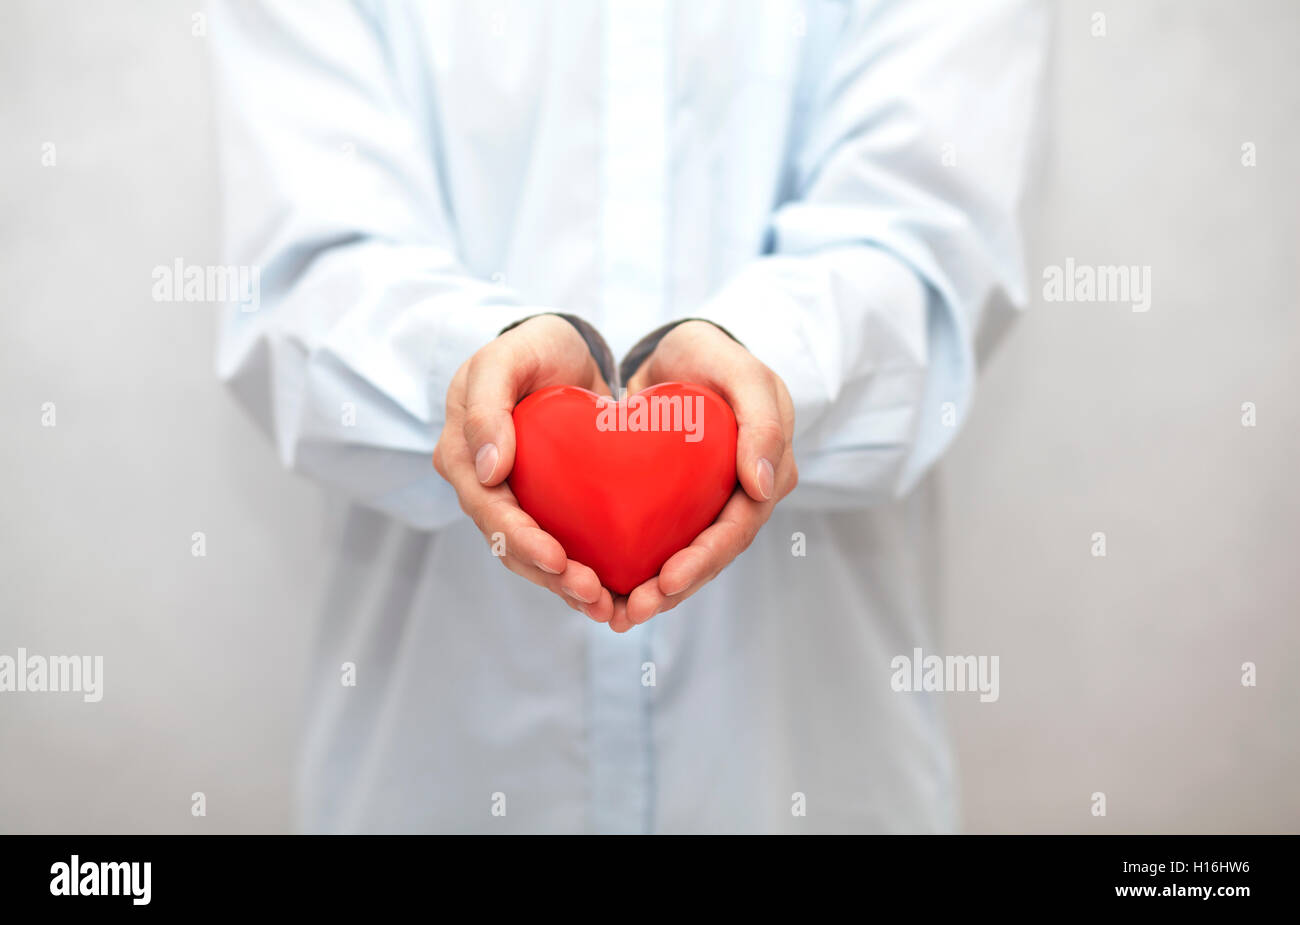 Red heart in hands Stock Photo